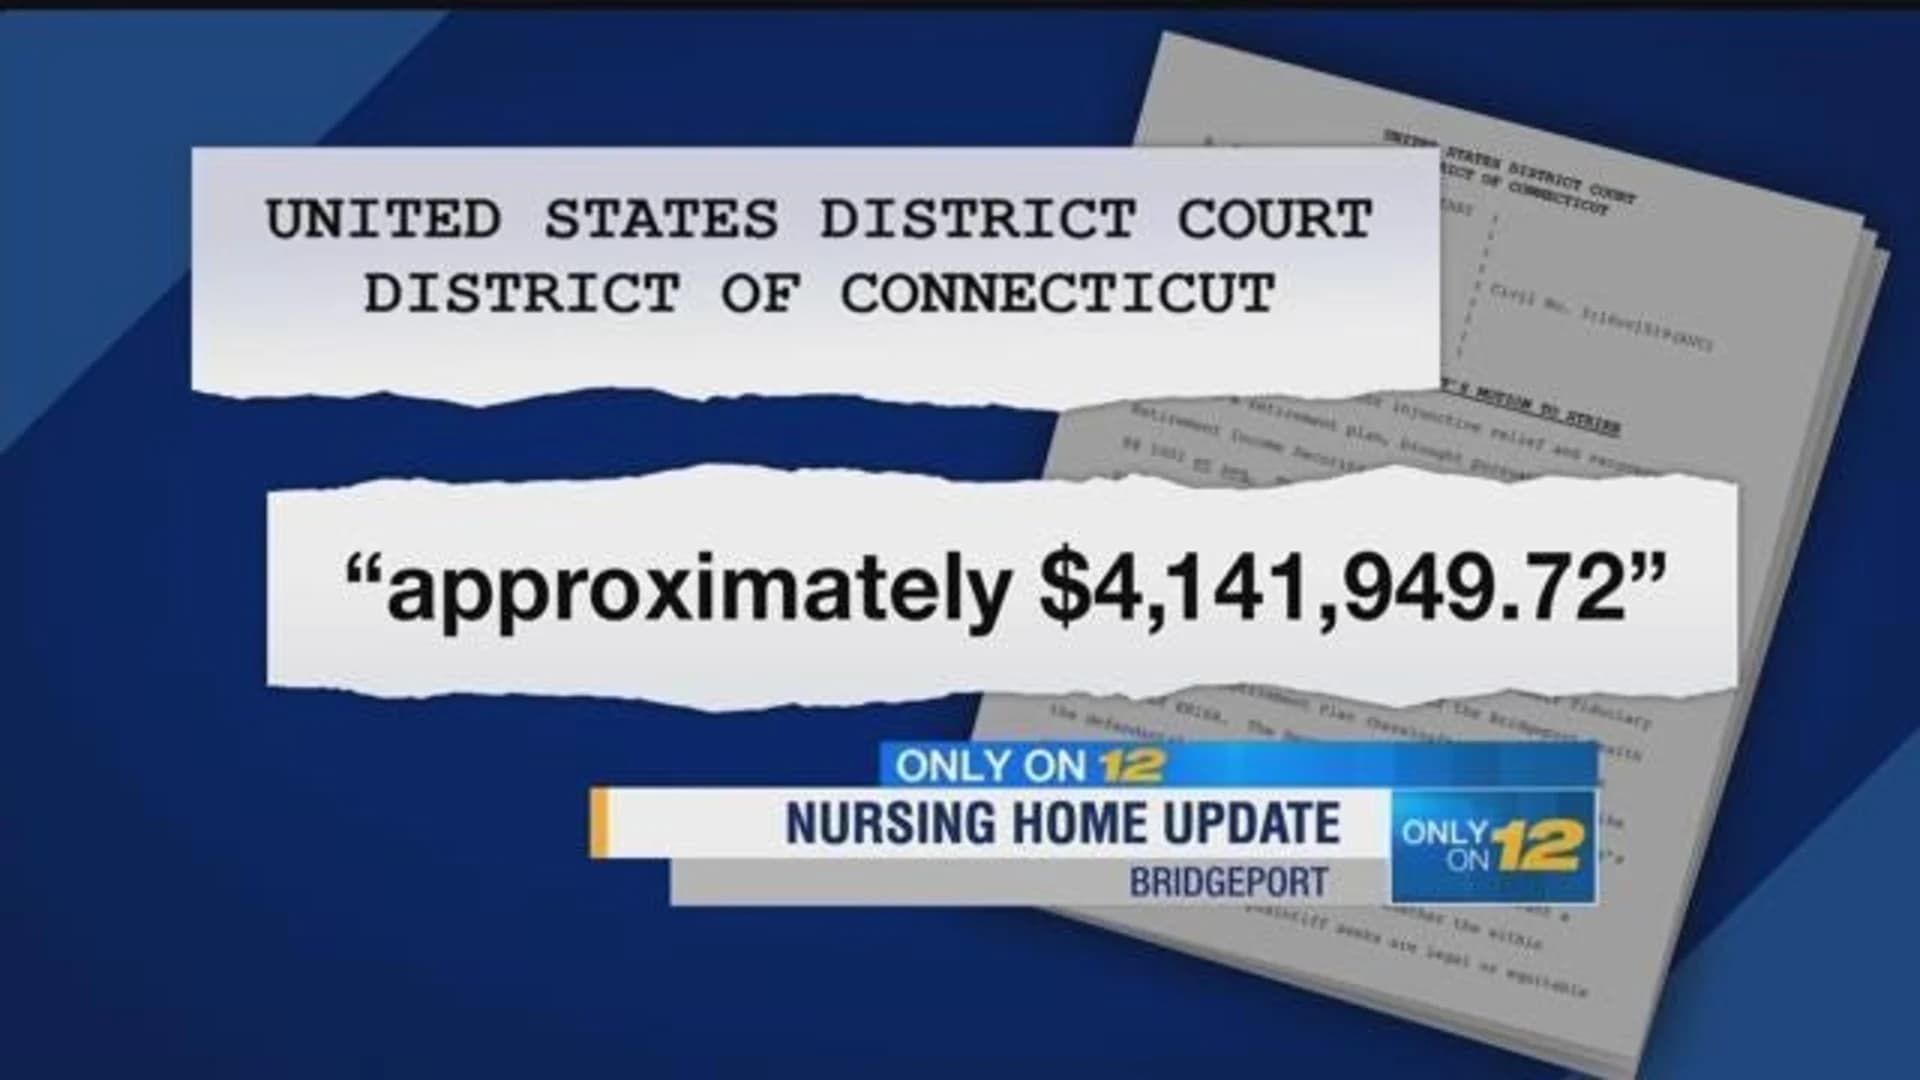 Millions mysteriously appear in account of troubled nursing home